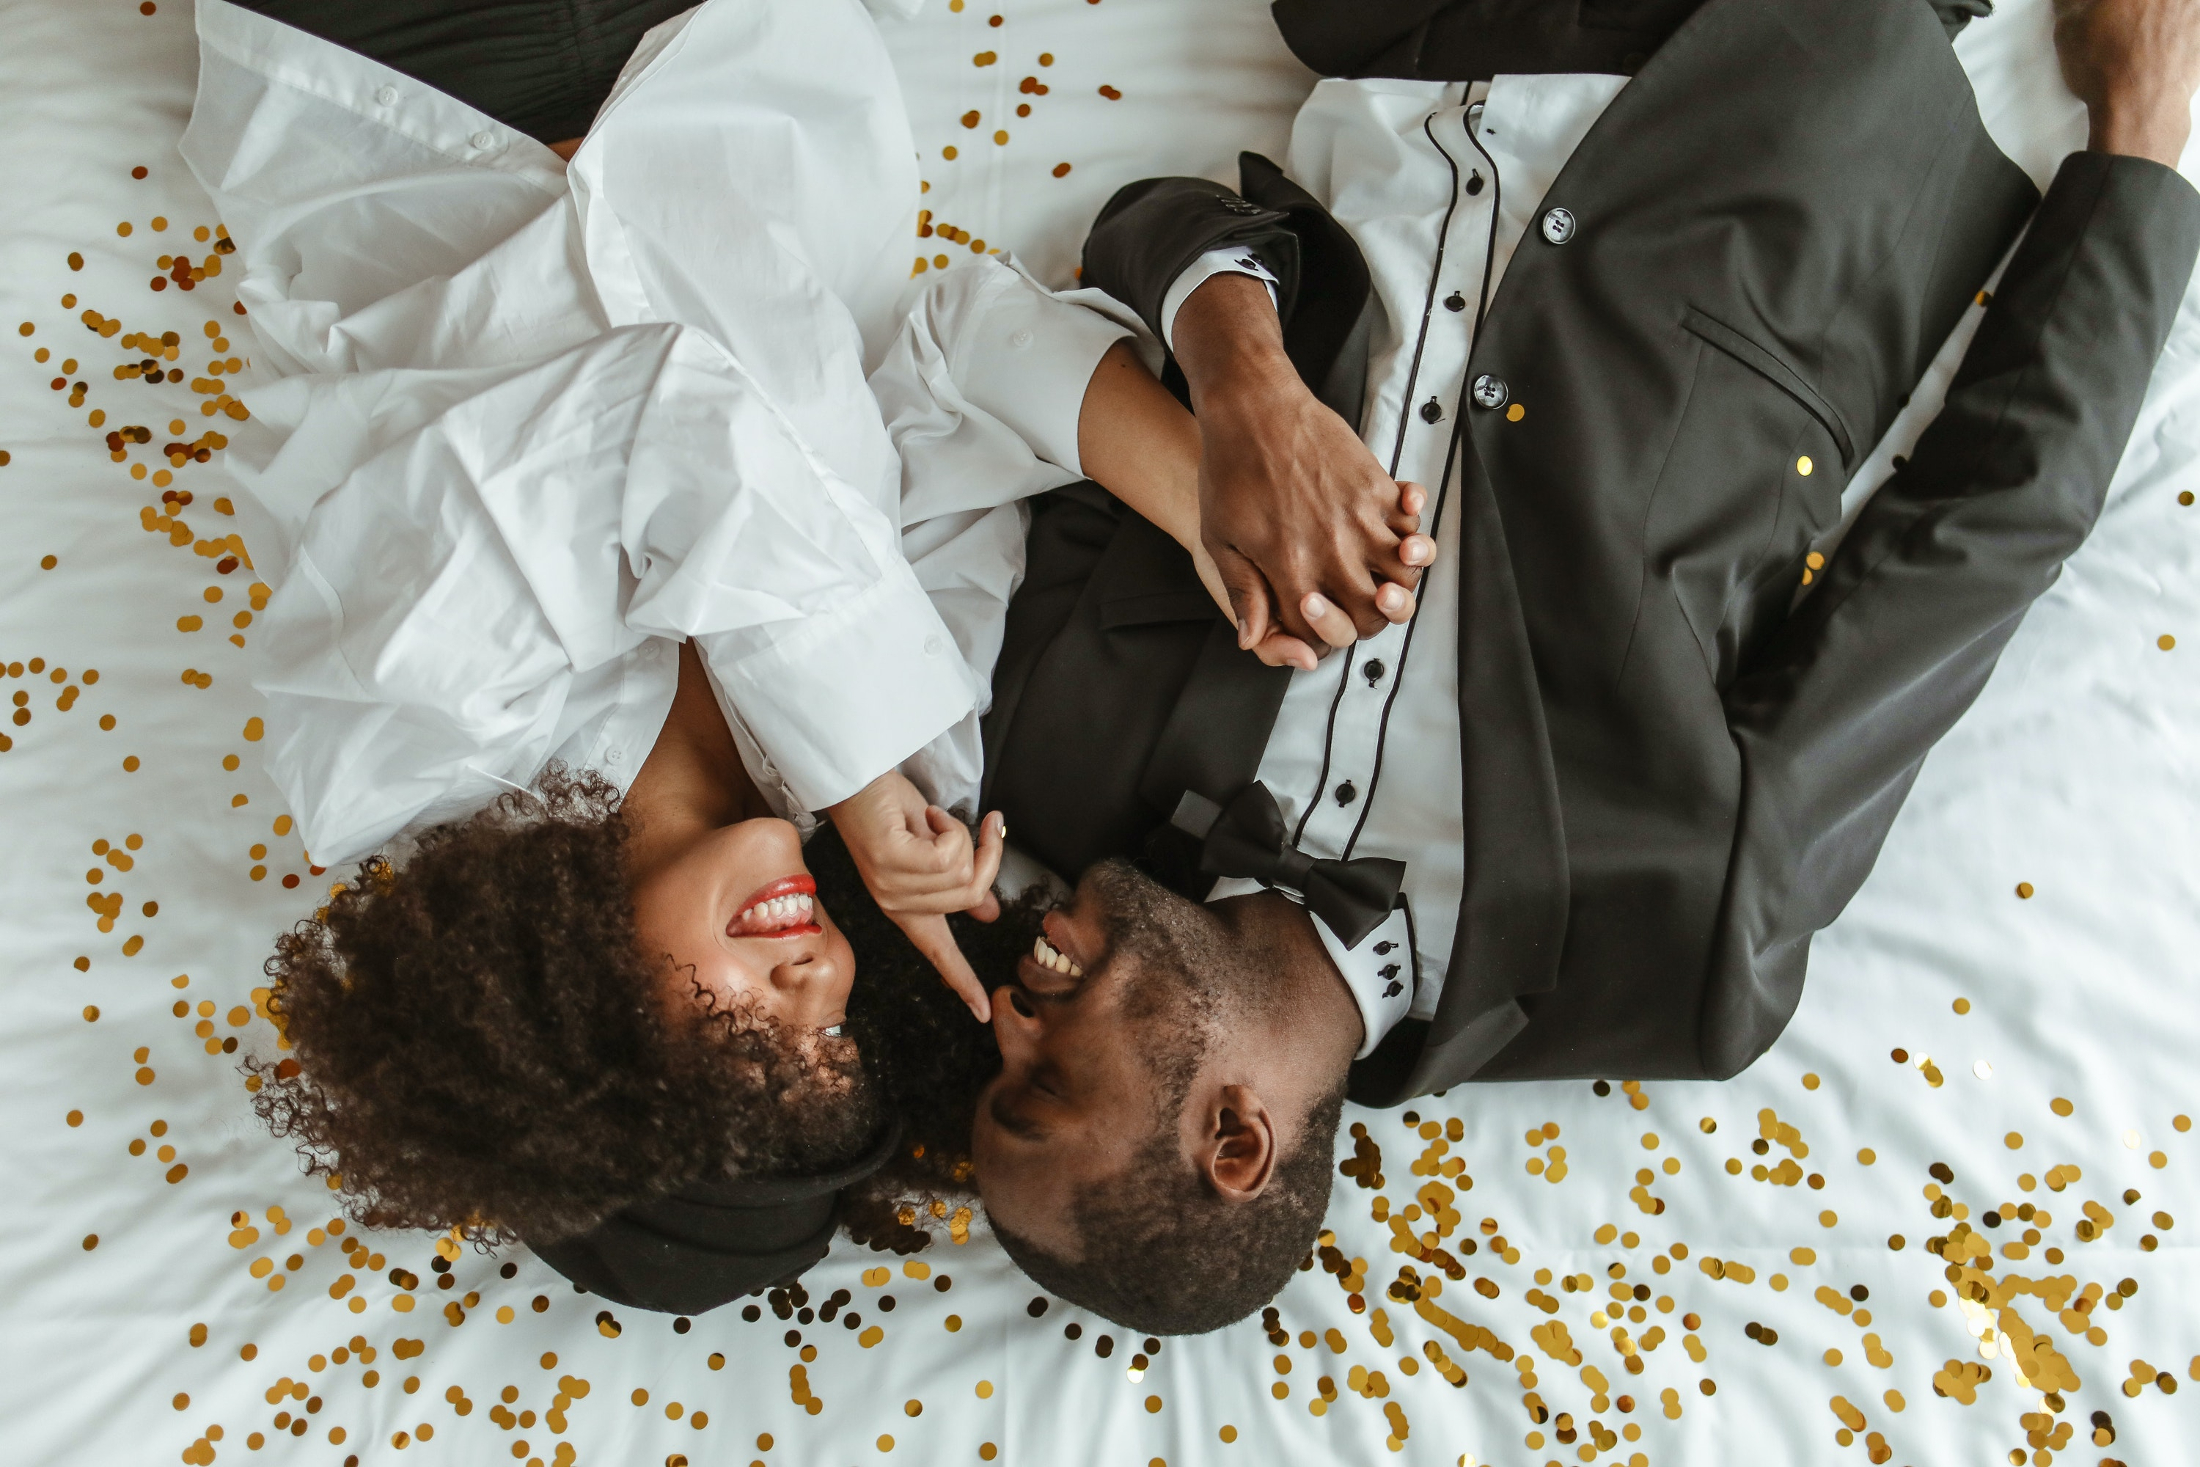 A couple lying on a bed. | Source: Pexels